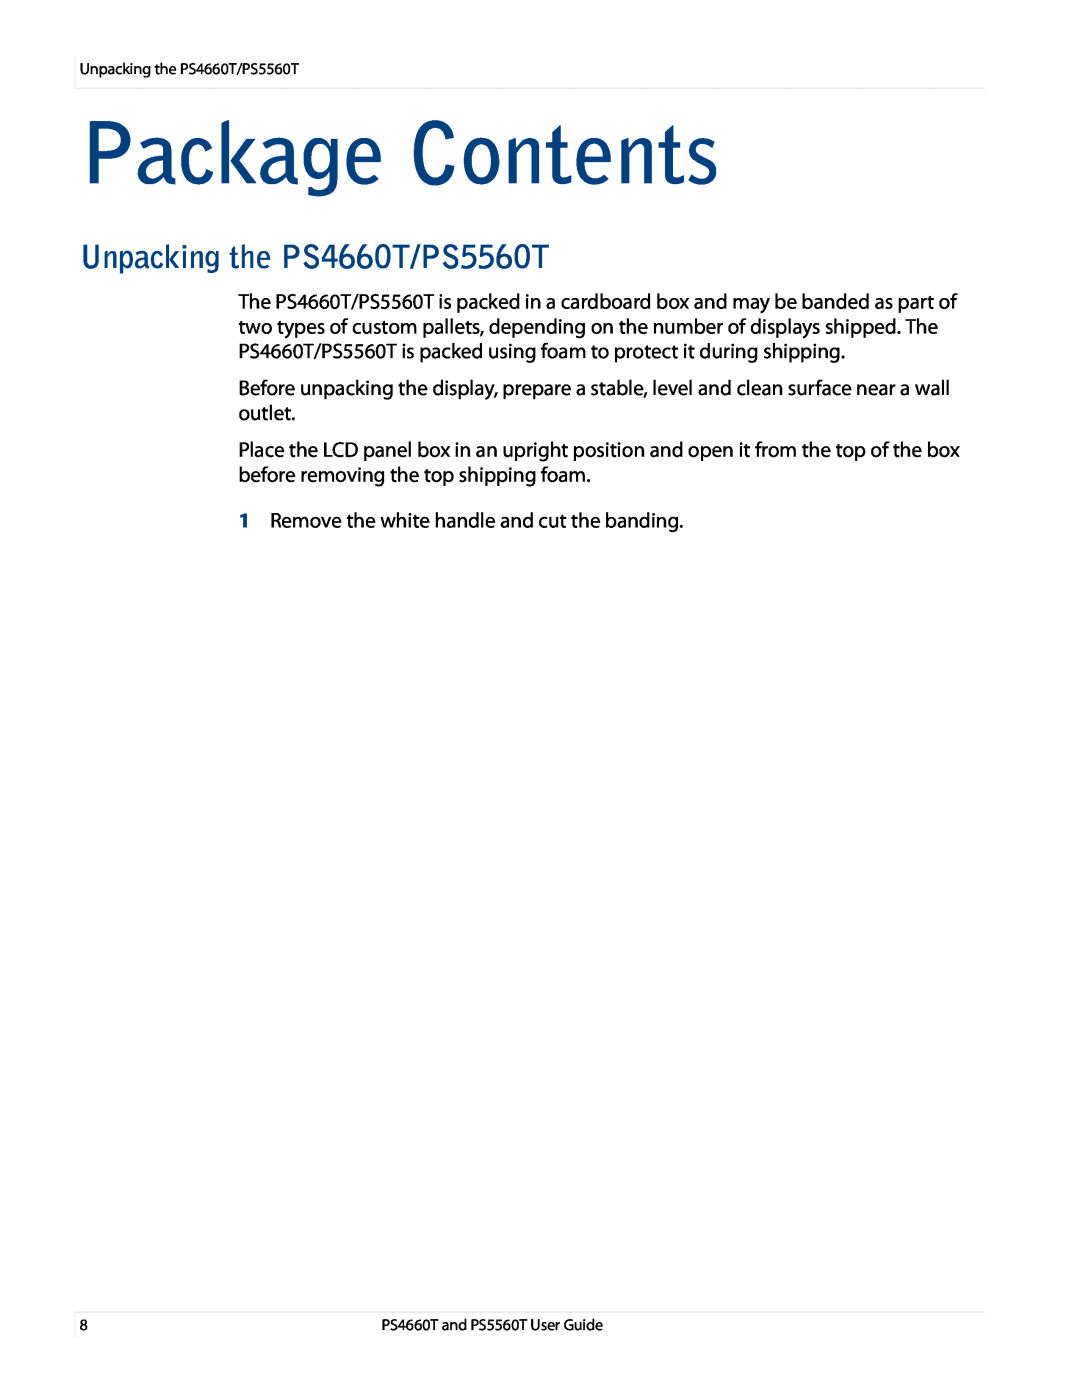 Planar PS4660T and PS5560T, PS466OT user manual Package Contents, Unpacking the PS4660T/PS5560T 